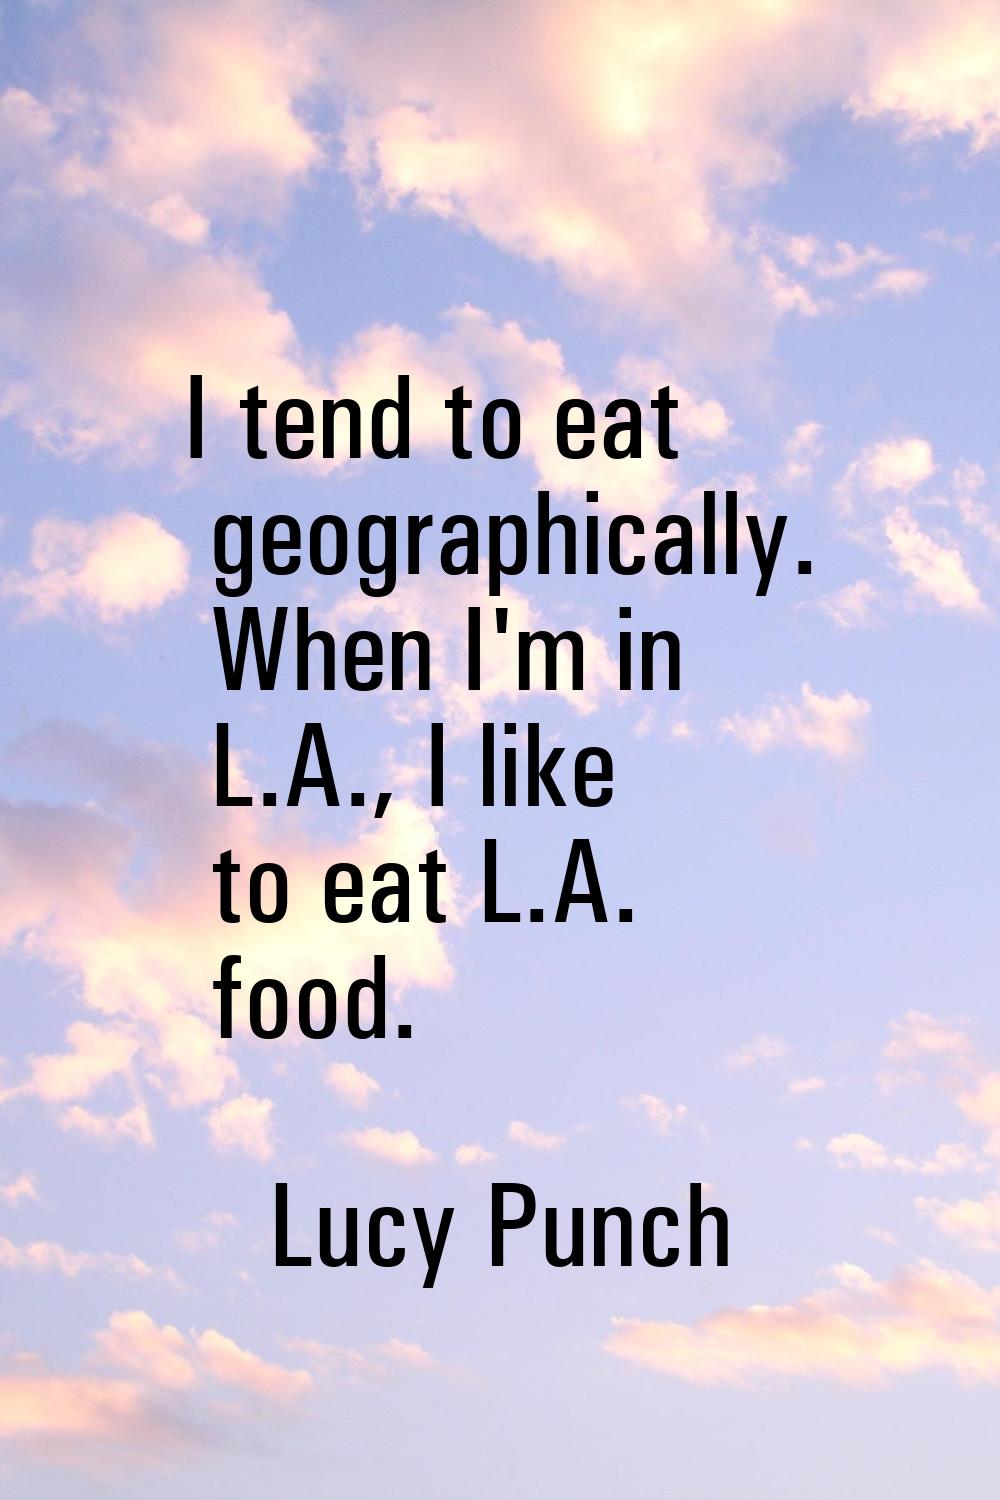 I tend to eat geographically. When I'm in L.A., I like to eat L.A. food.